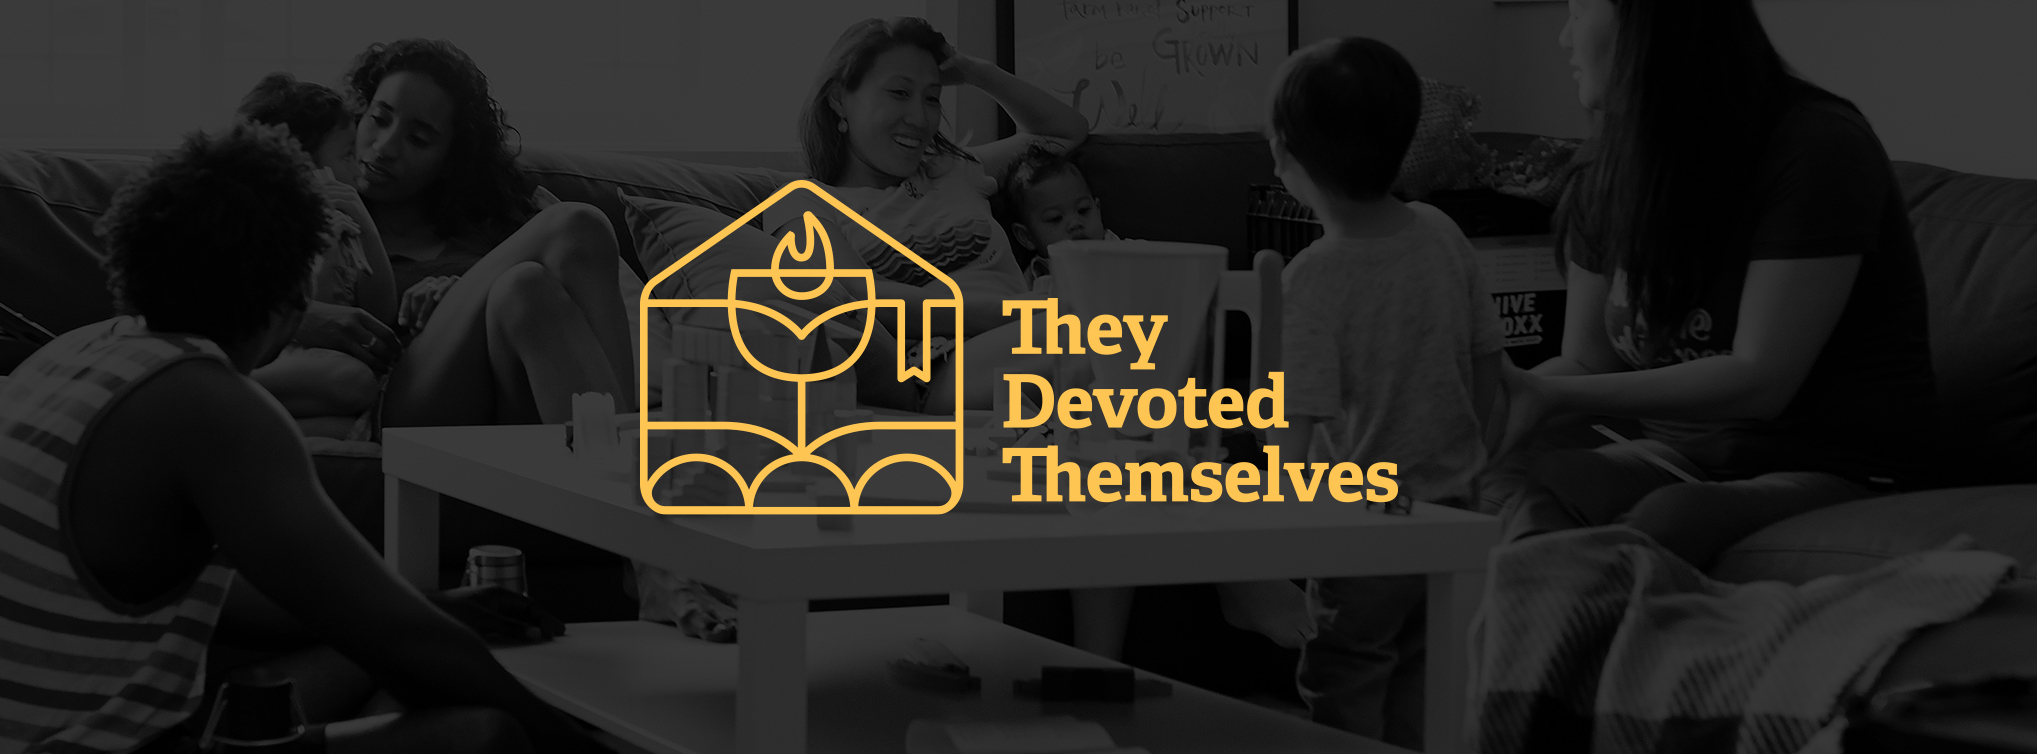 The Devoted Themselves logo design overlay on a smallgroup of people meeting